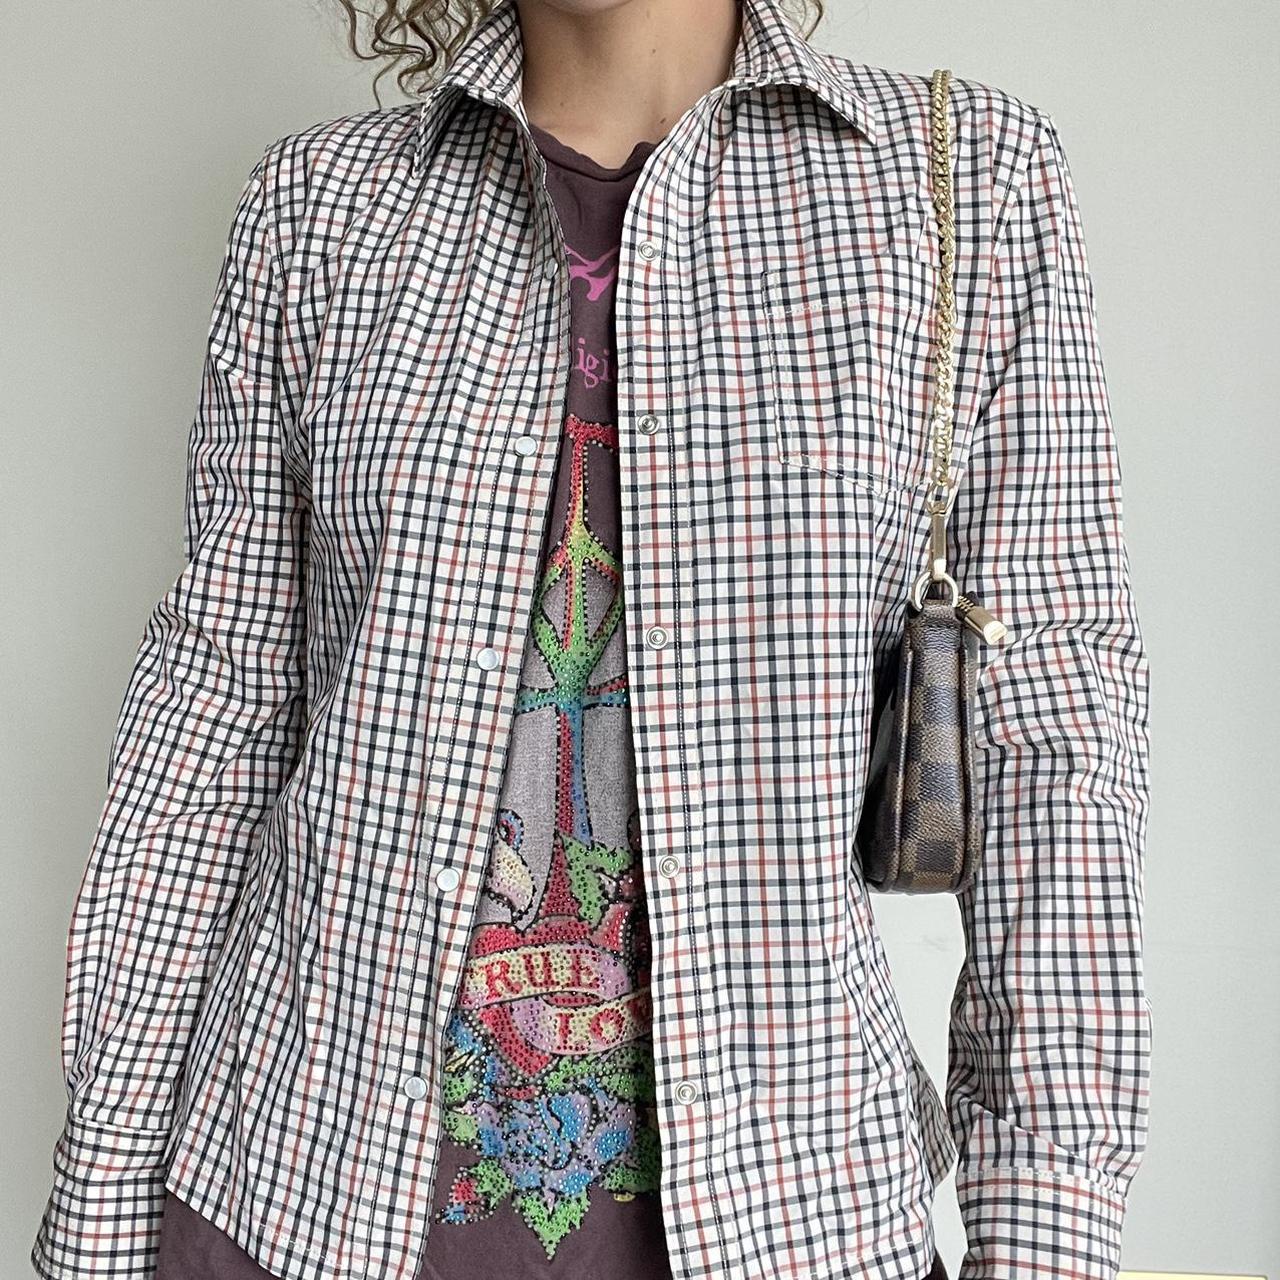 Product Image 1 - Super cute checkered shirt! Looks